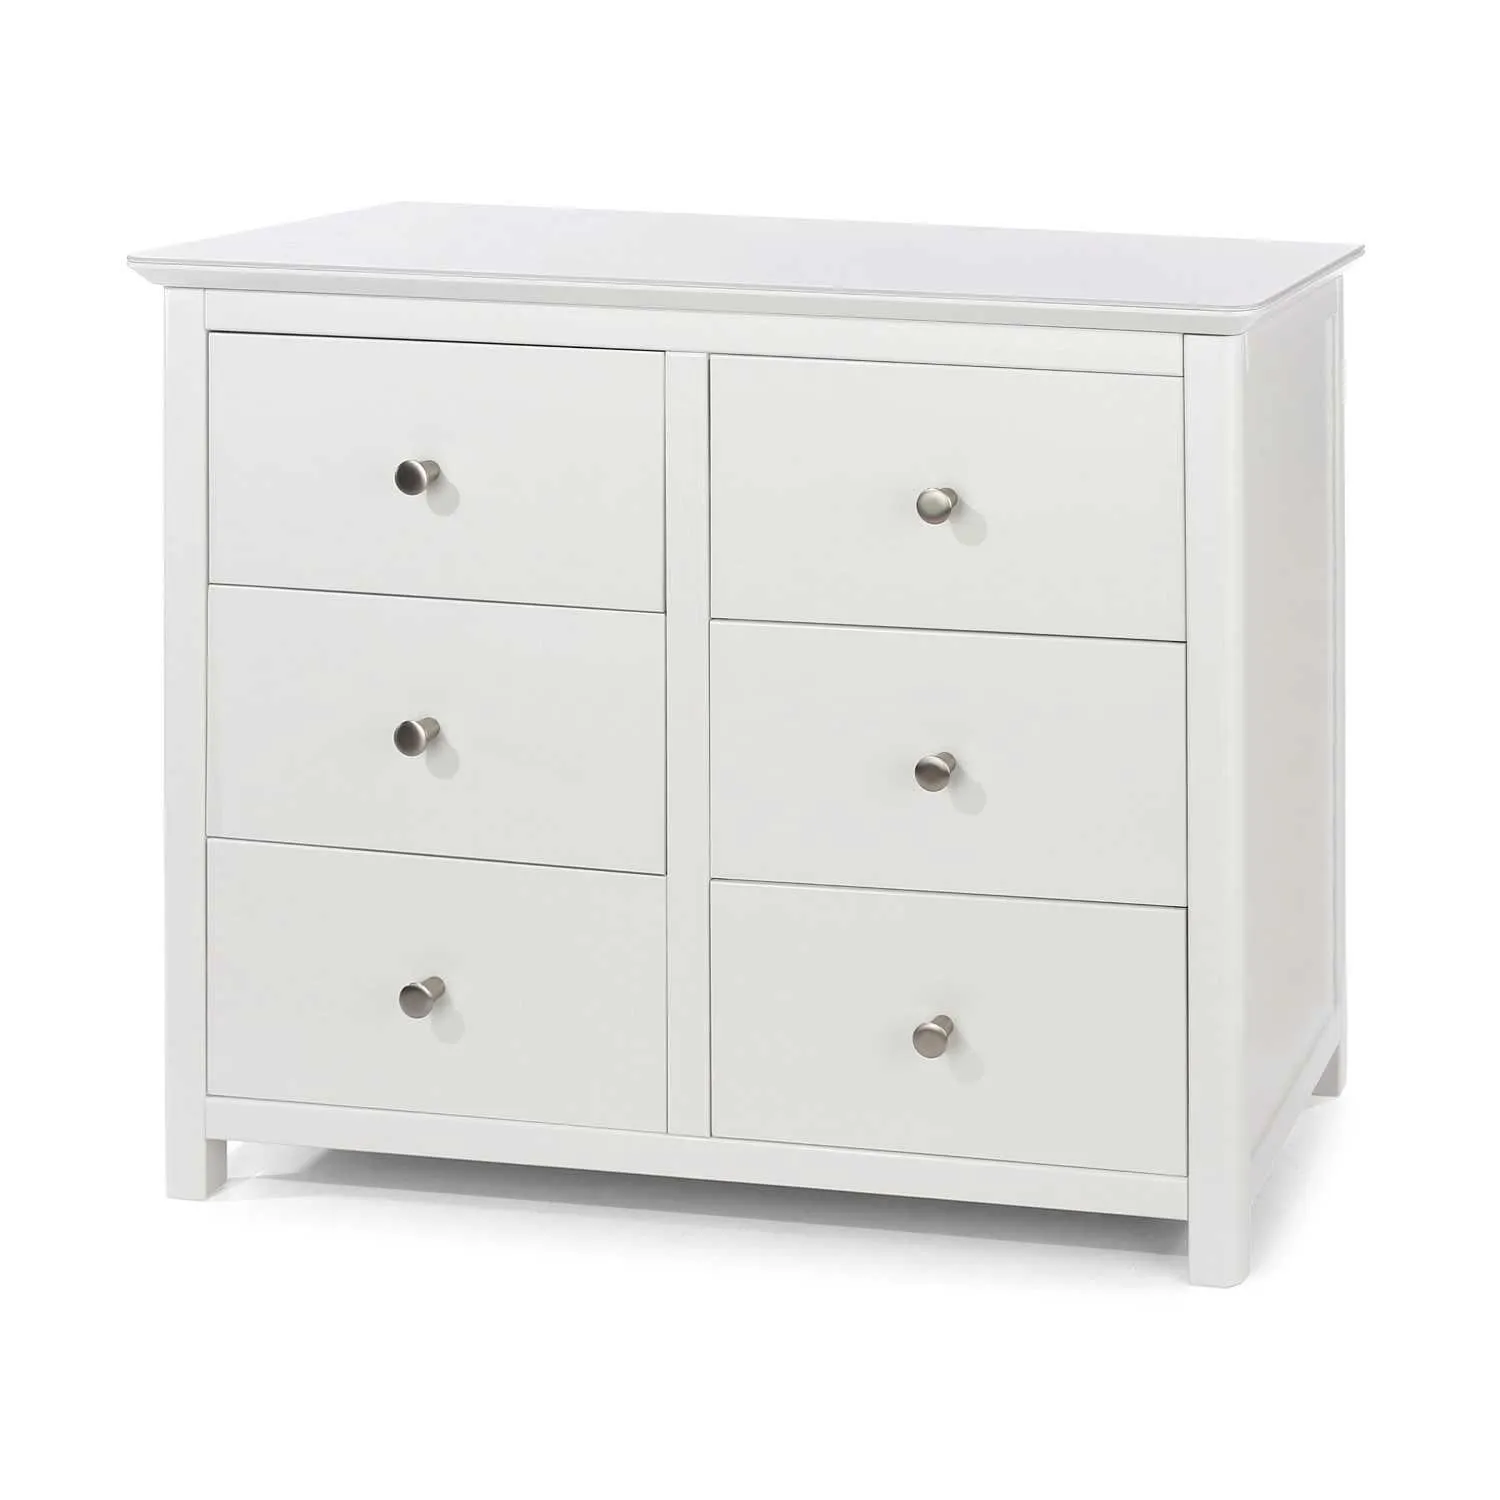 Nairn Modern White Painted Wooden Wide Chest of 3+3 Drawers 90.5x110cm